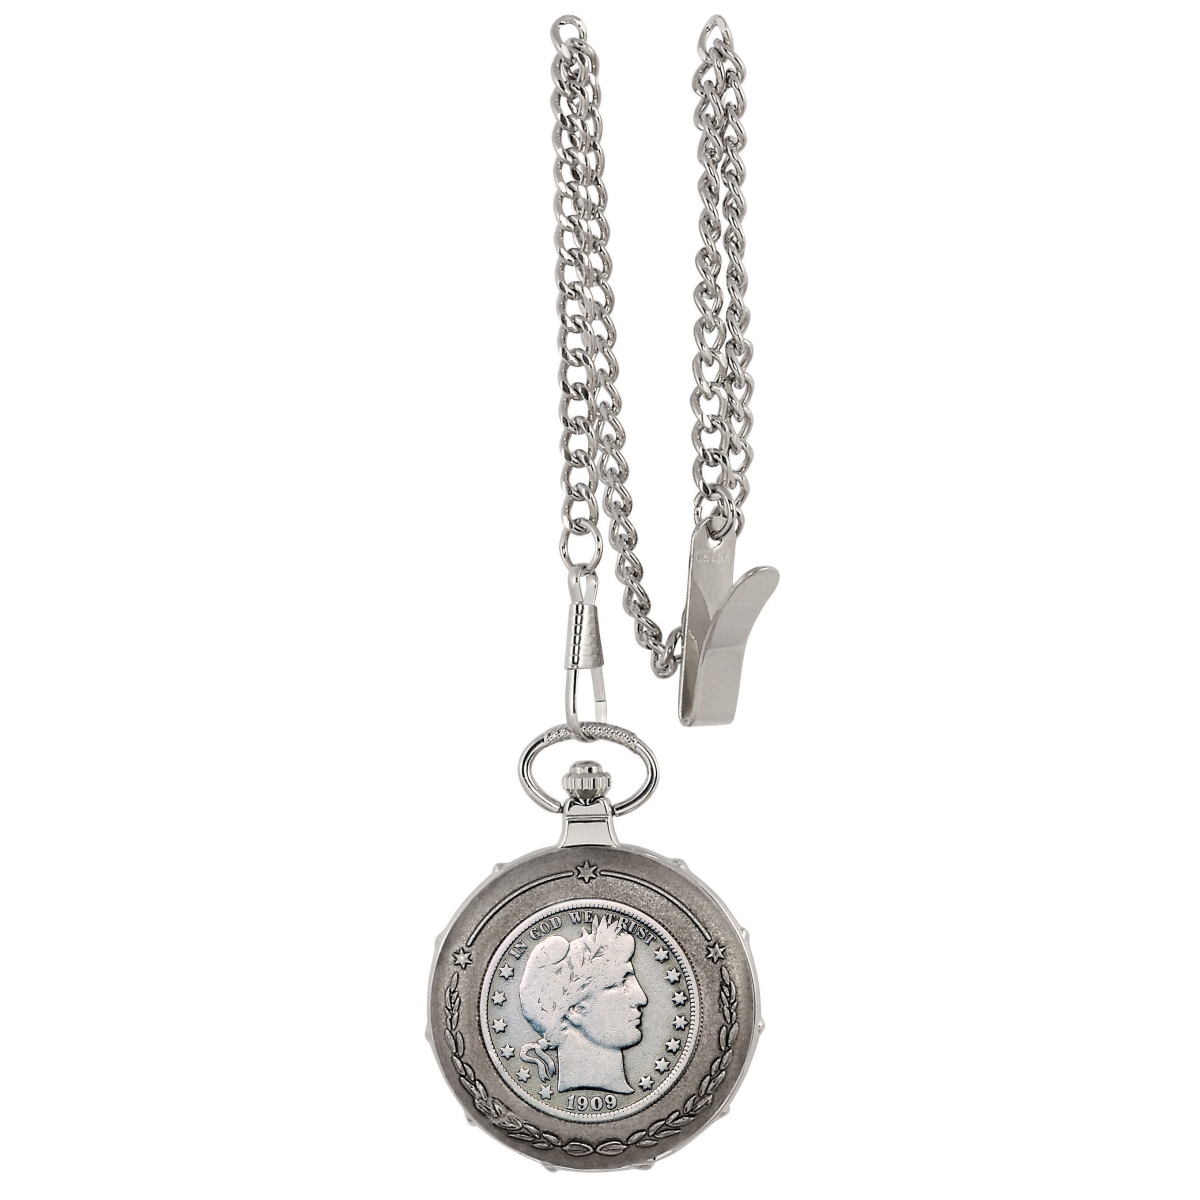 Picture of UPM Global 13209 Silver Barber Half Dollar Silvertone Train Coin Pocket Watch